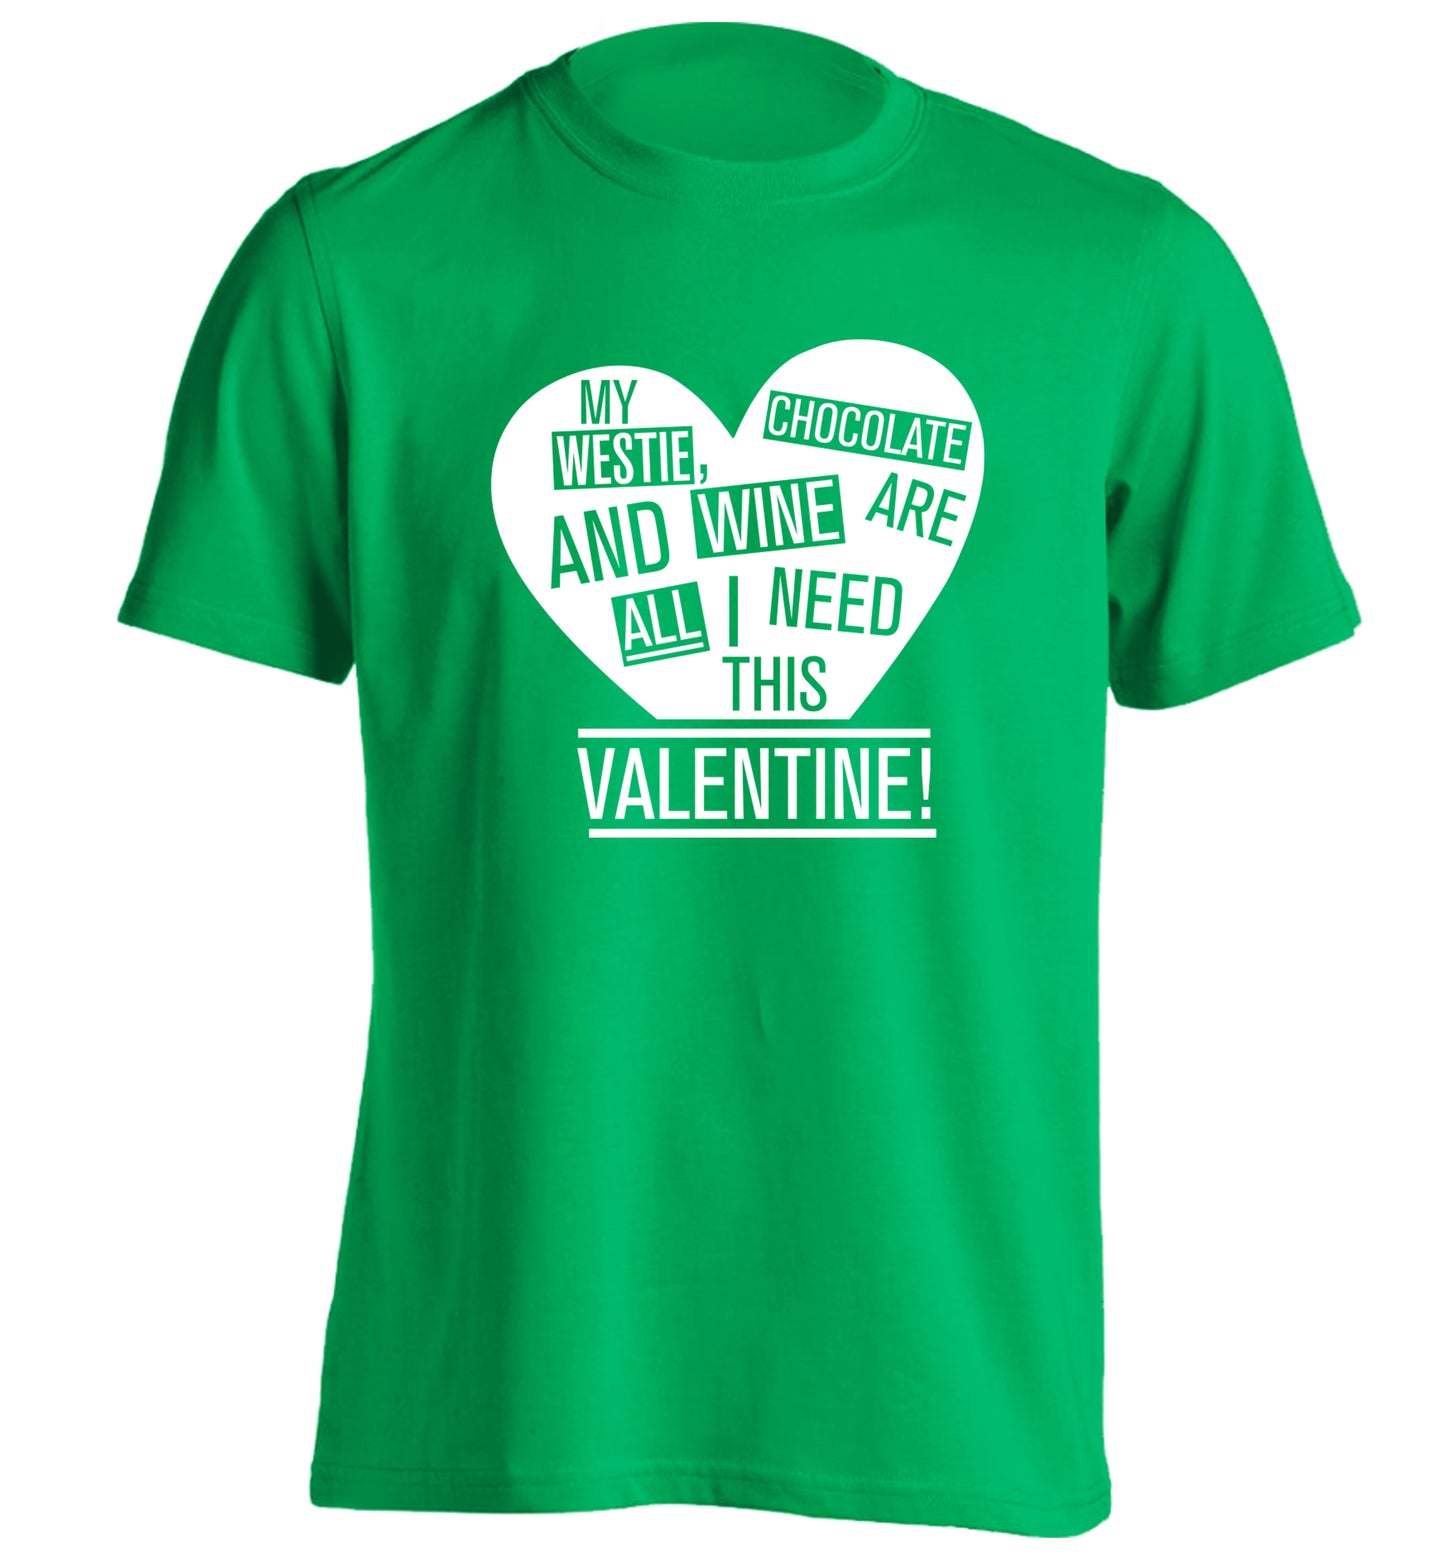 My westie, chocolate and wine are all I need this valentine! adults unisex green Tshirt 2XL